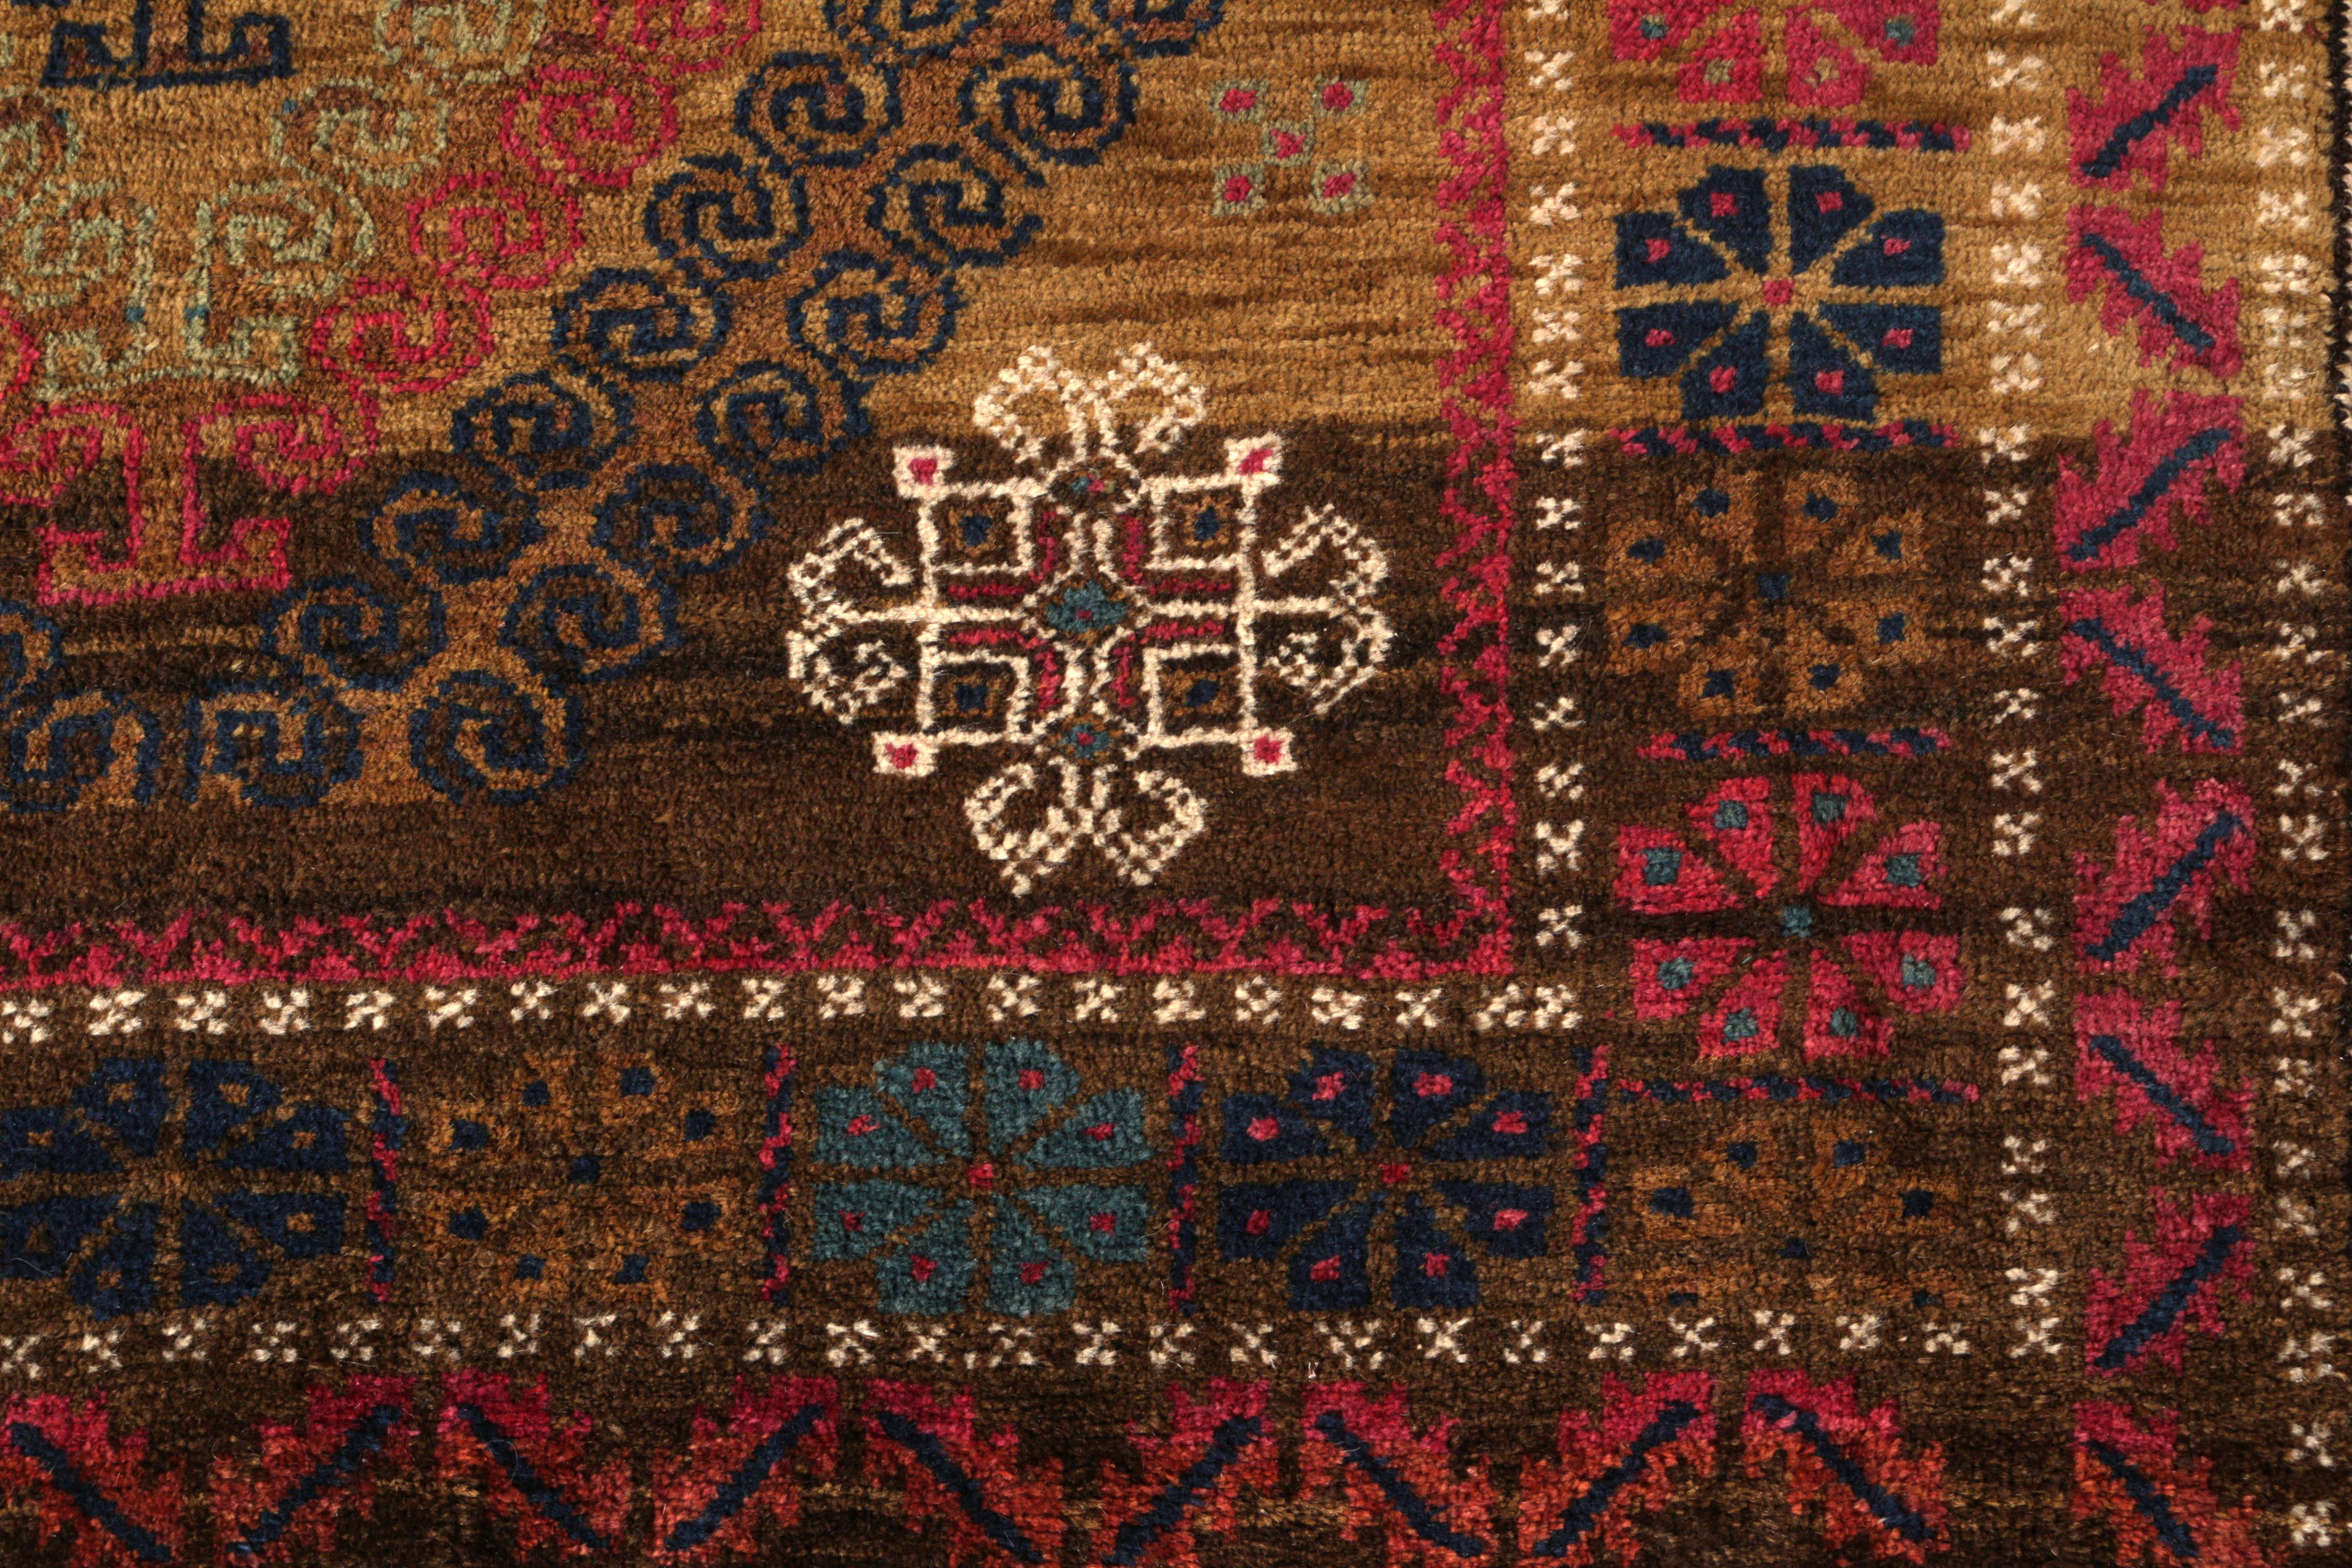 Hand knotted in wool originating circa 1950-1960, this vintage midcentury Persian rug enjoys both an astutely preserved quality wool and one of the most uniquely intricate plays of geometry through color among this collection of vintage Baluch rug